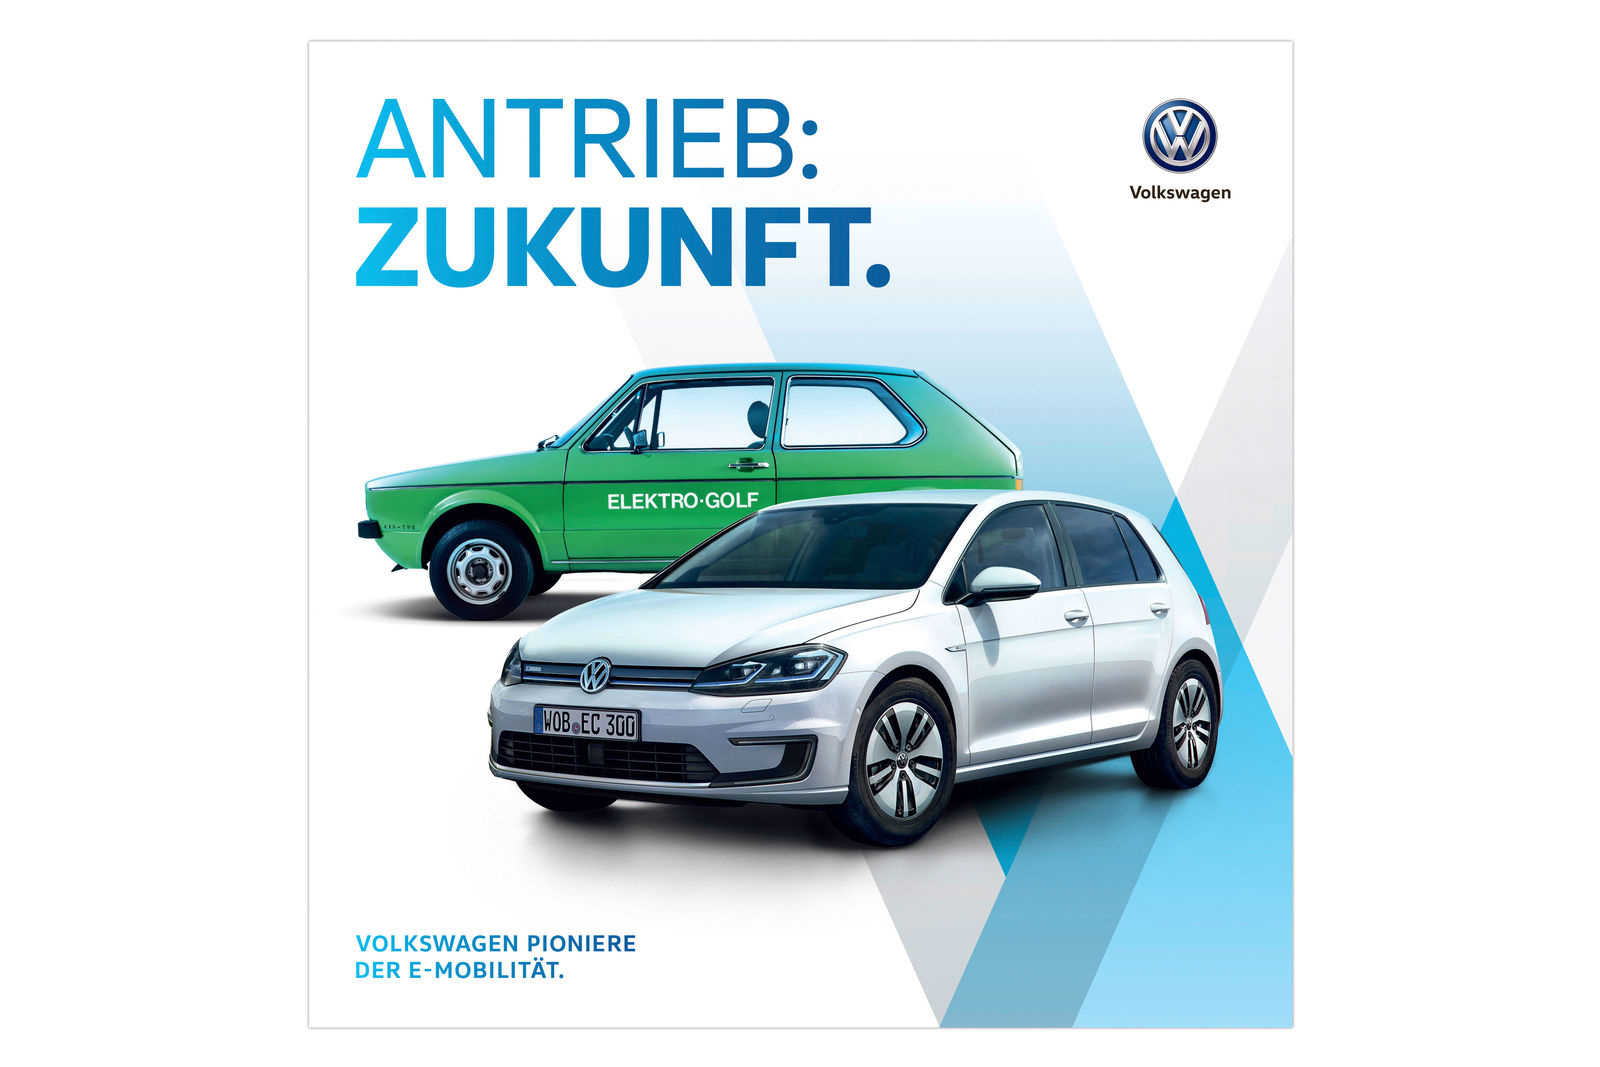 Successful campaign on the history of electromobility at Volkswagen